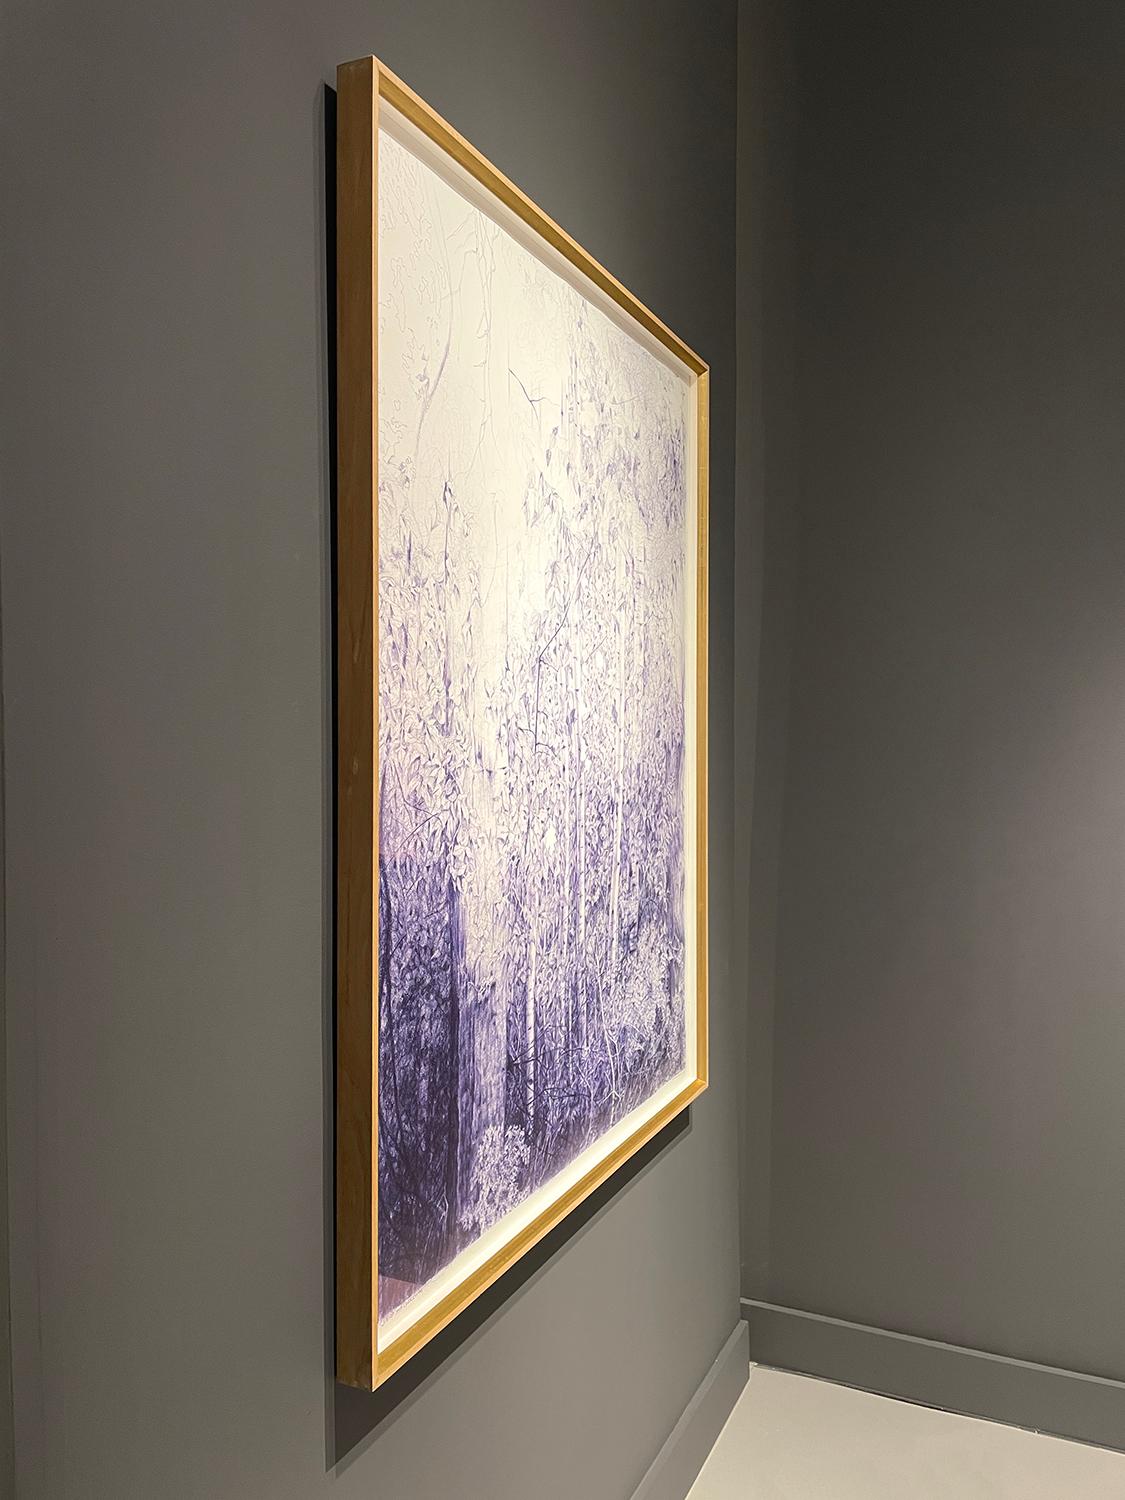 Linda Newman Boughton, Yield and Overcome, 2022
Framed dimensions: 59.5 x 47.5 inches / Image dimensions: 58.5 x 46.5 inches
Landscape drawing of trees in ballpoint pen on Arches paper, framed in custom wooden frame with gold interior,